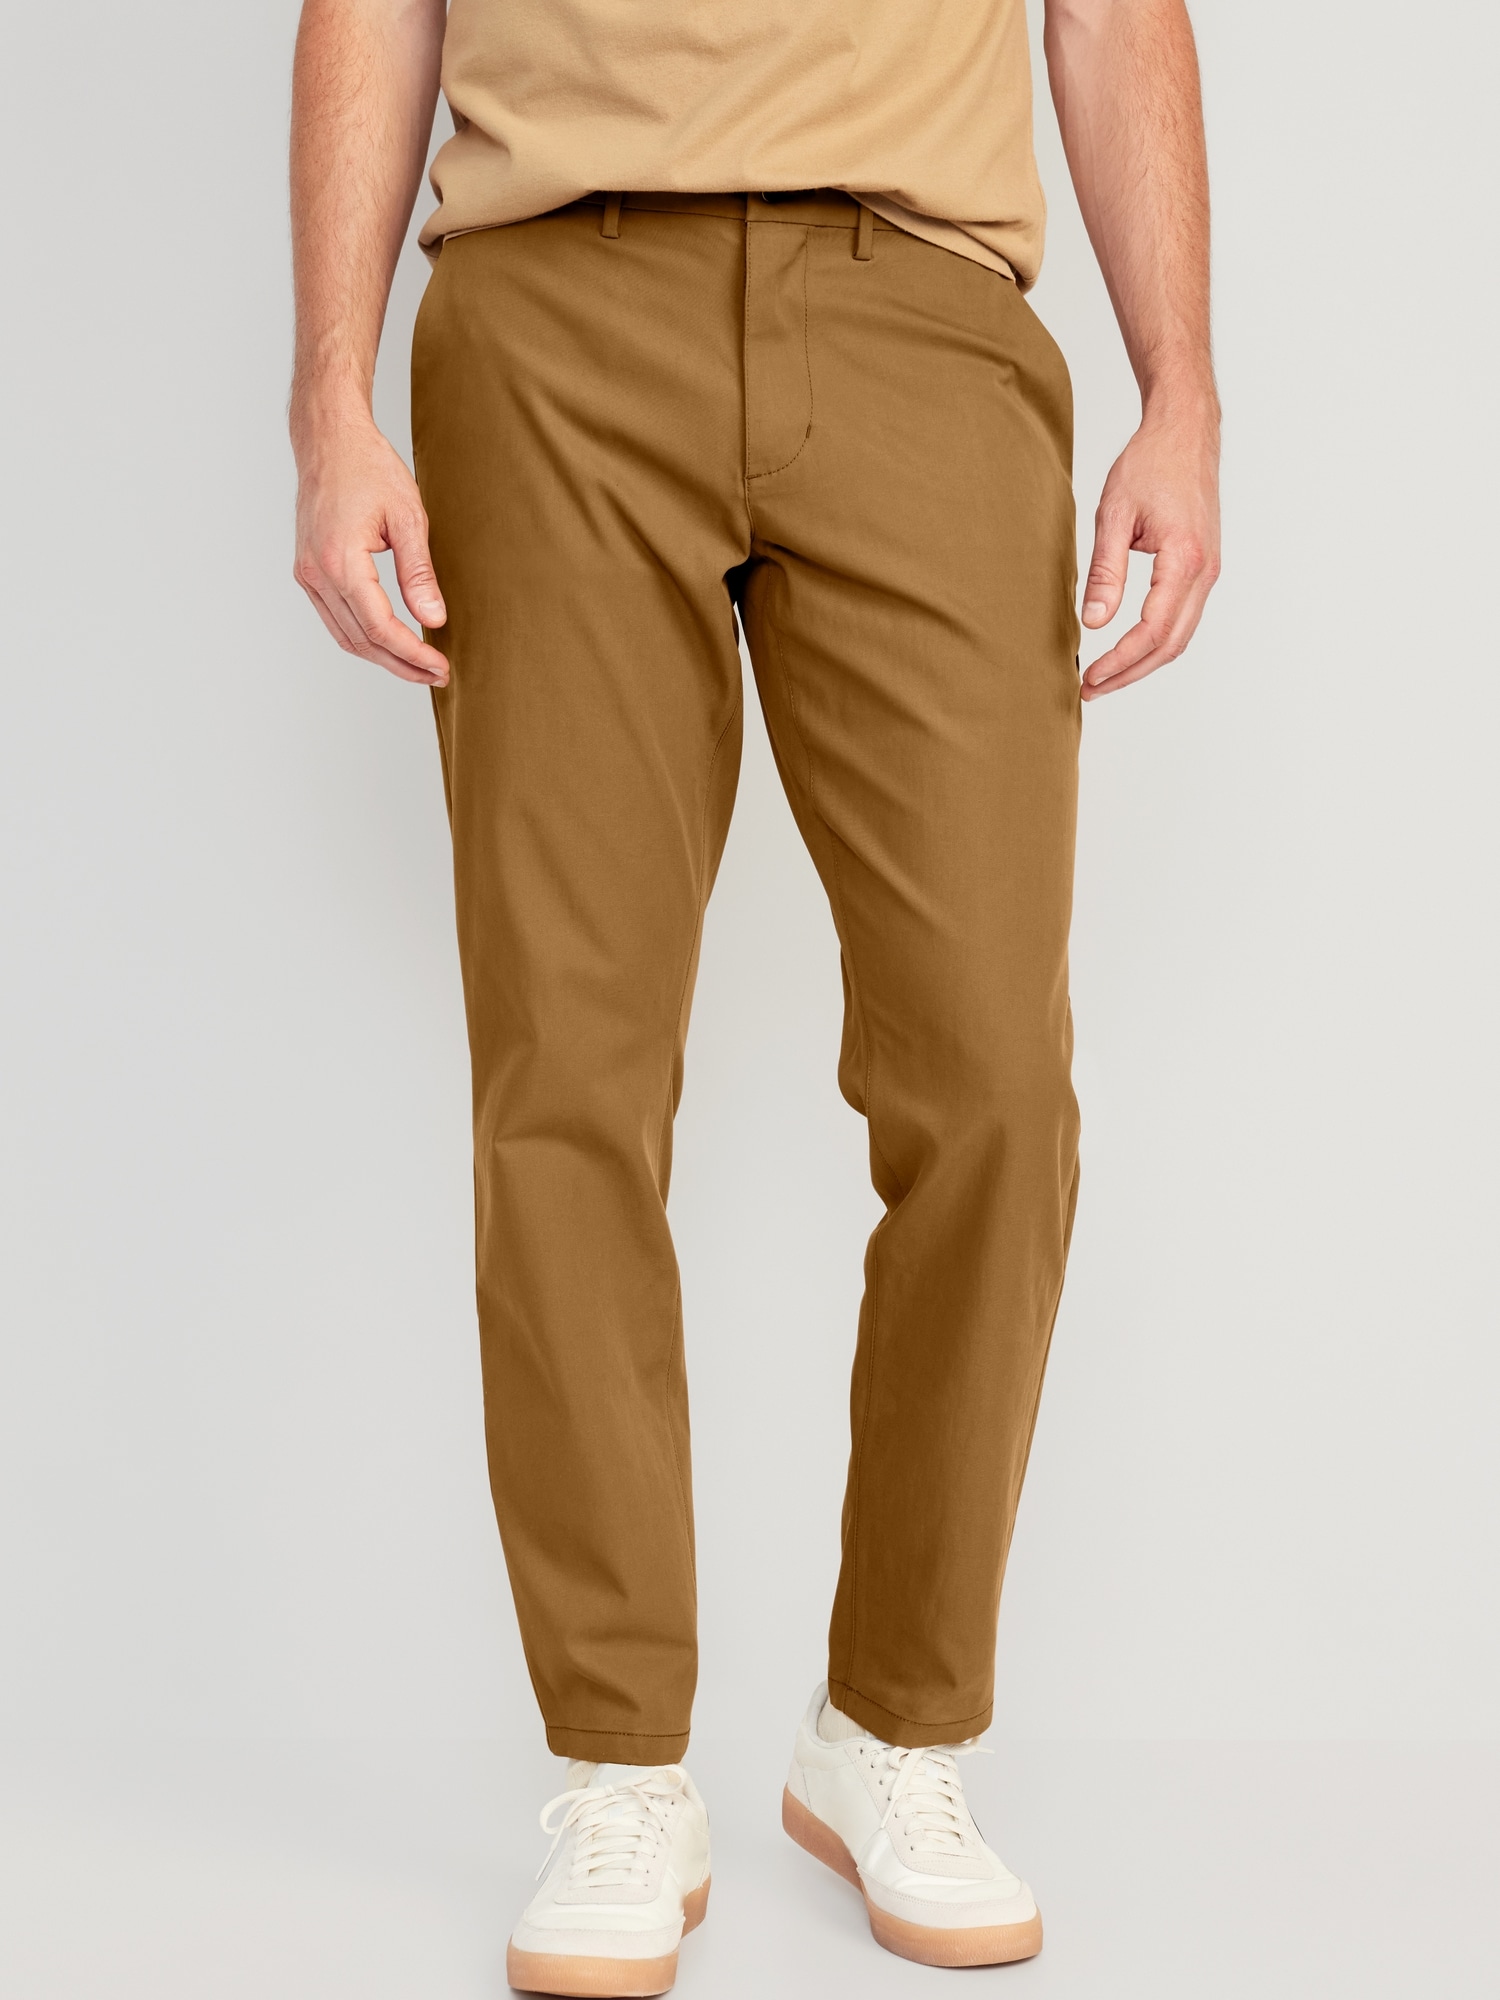 7 Best Chinos for Men: Picked by a Style Expert